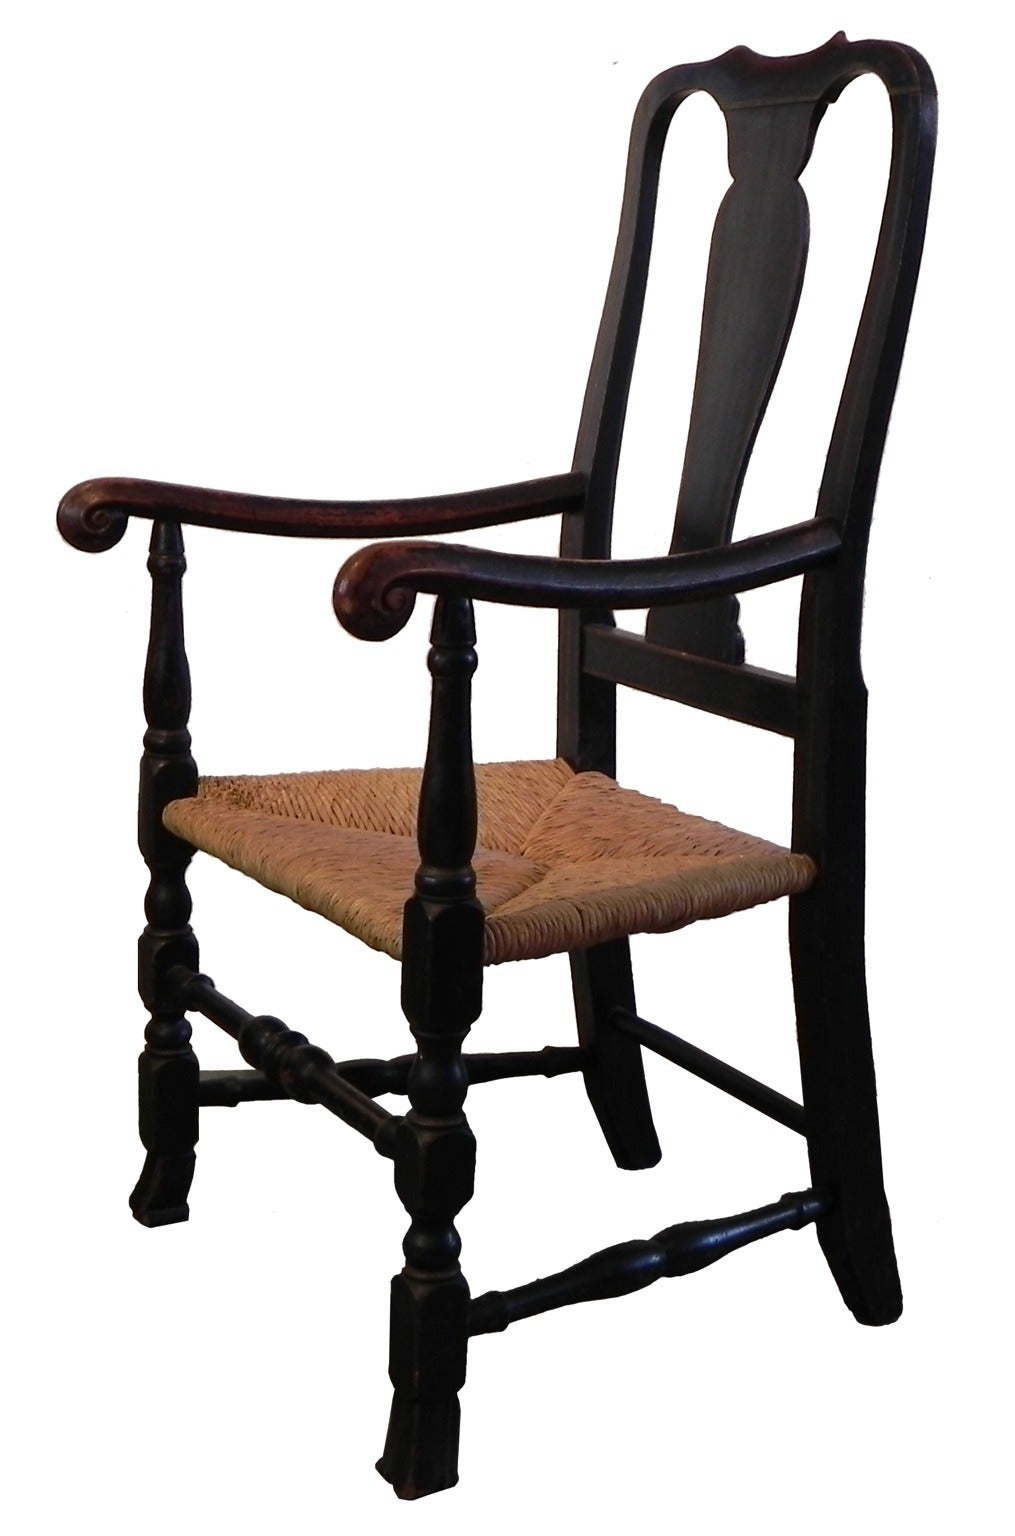 This is an armchair having elements of the early Queen Anne period with wonderfully proportioned curves to the top half of the chair. Ram’s horn hand holds highlight the outward scrolling arms, and enclose a rush seat with the original ash seat